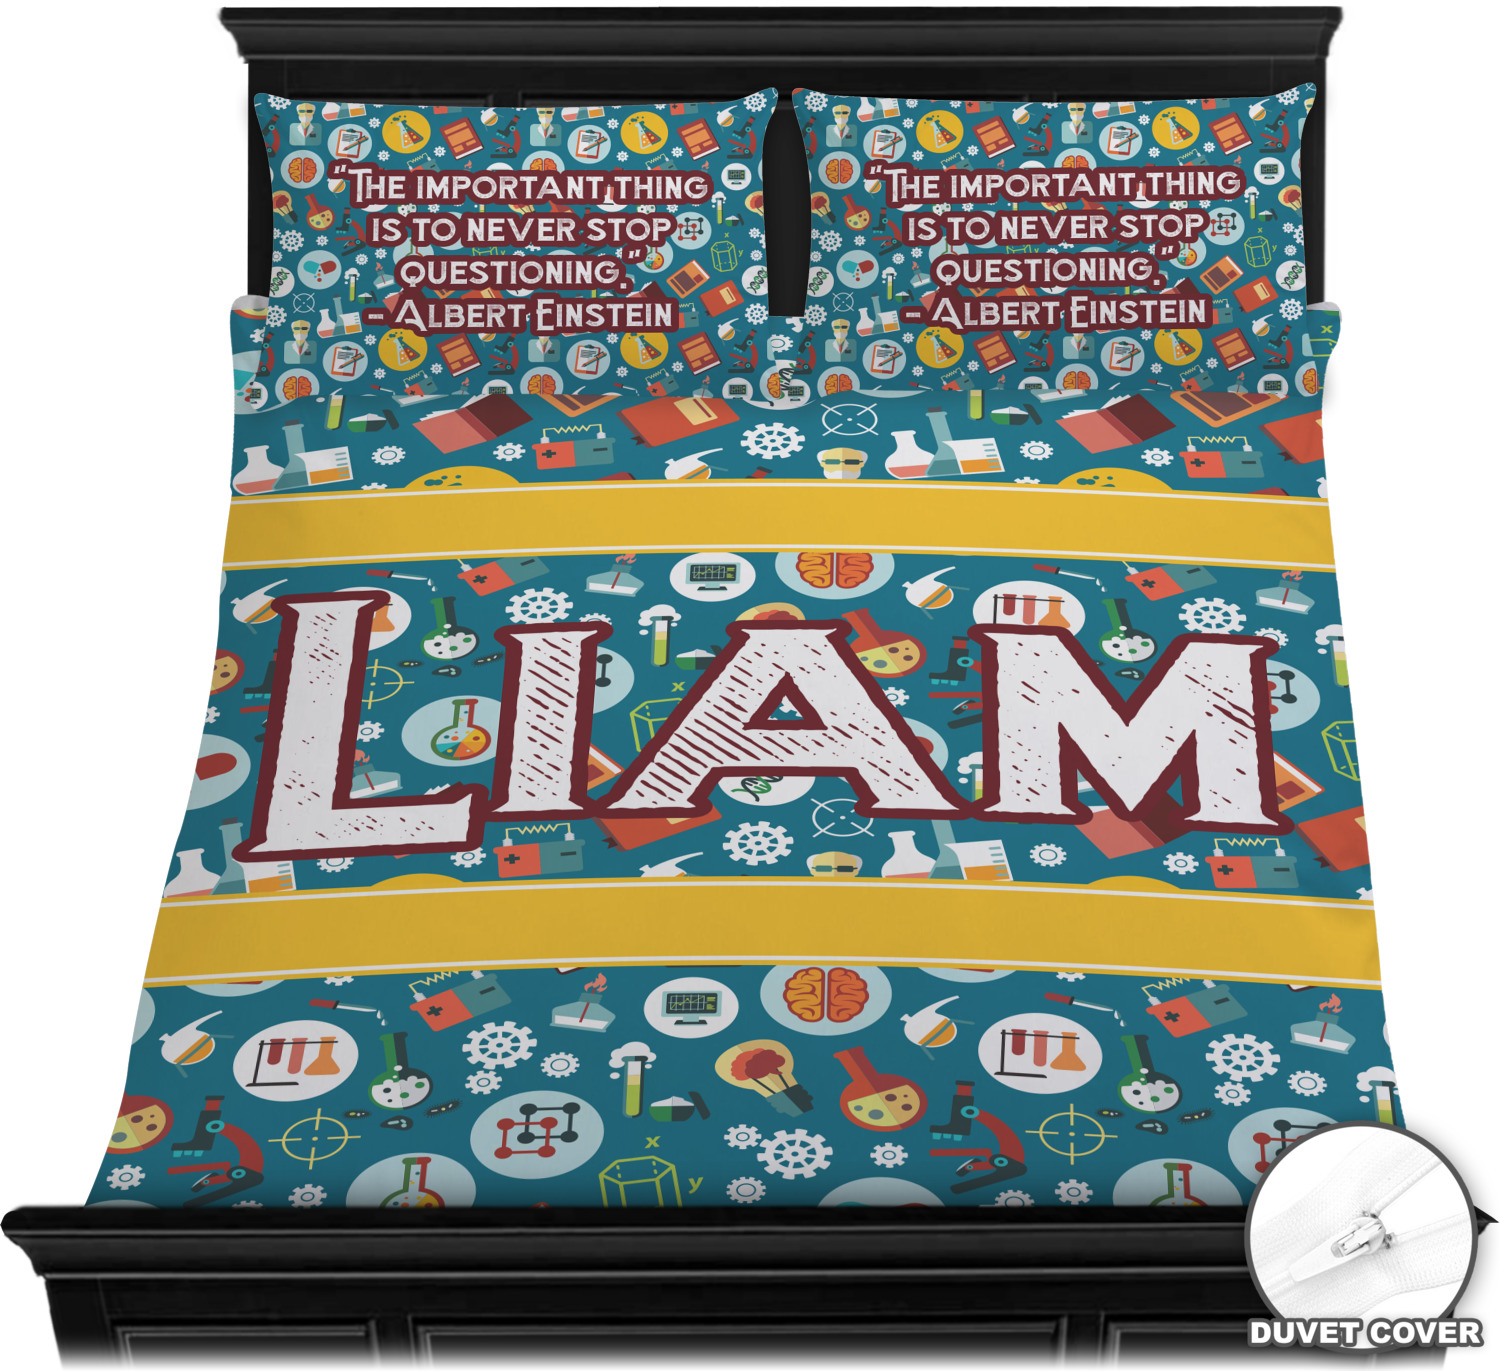 Rocket Science Duvet Covers Personalized Youcustomizeit